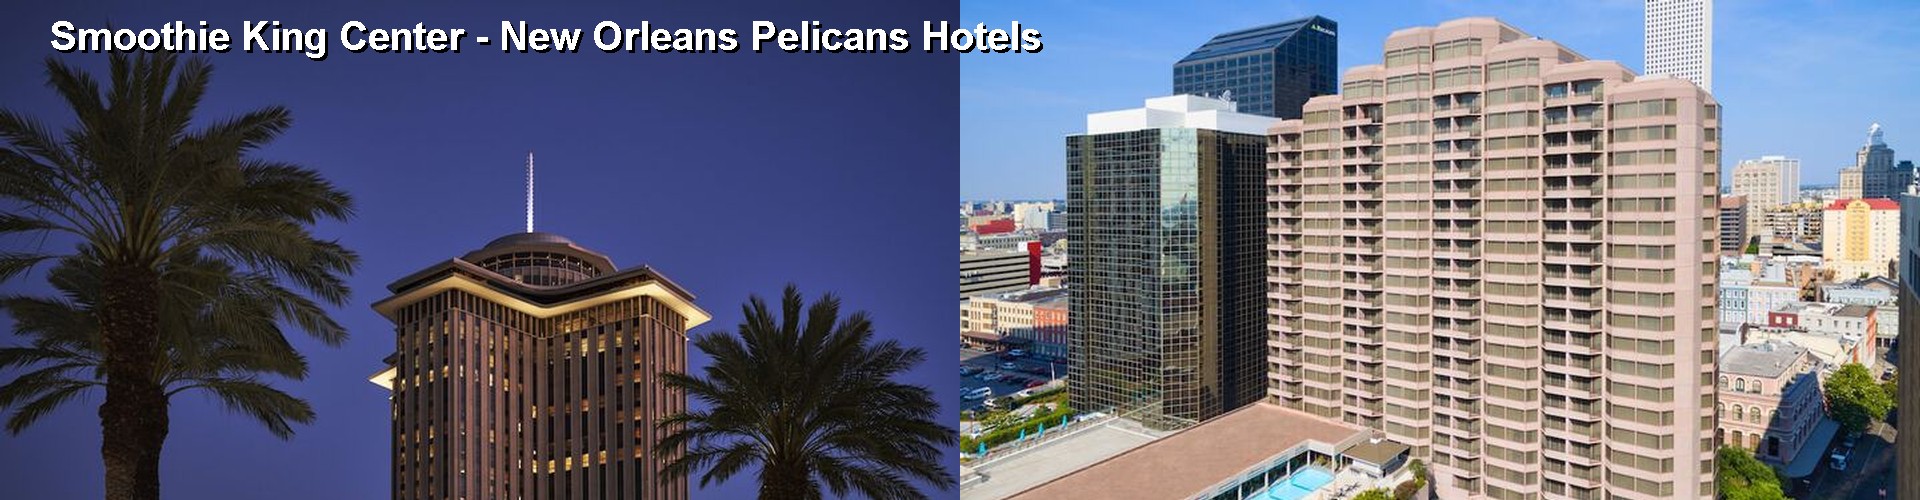 5 Best Hotels near Smoothie King Center - New Orleans Pelicans